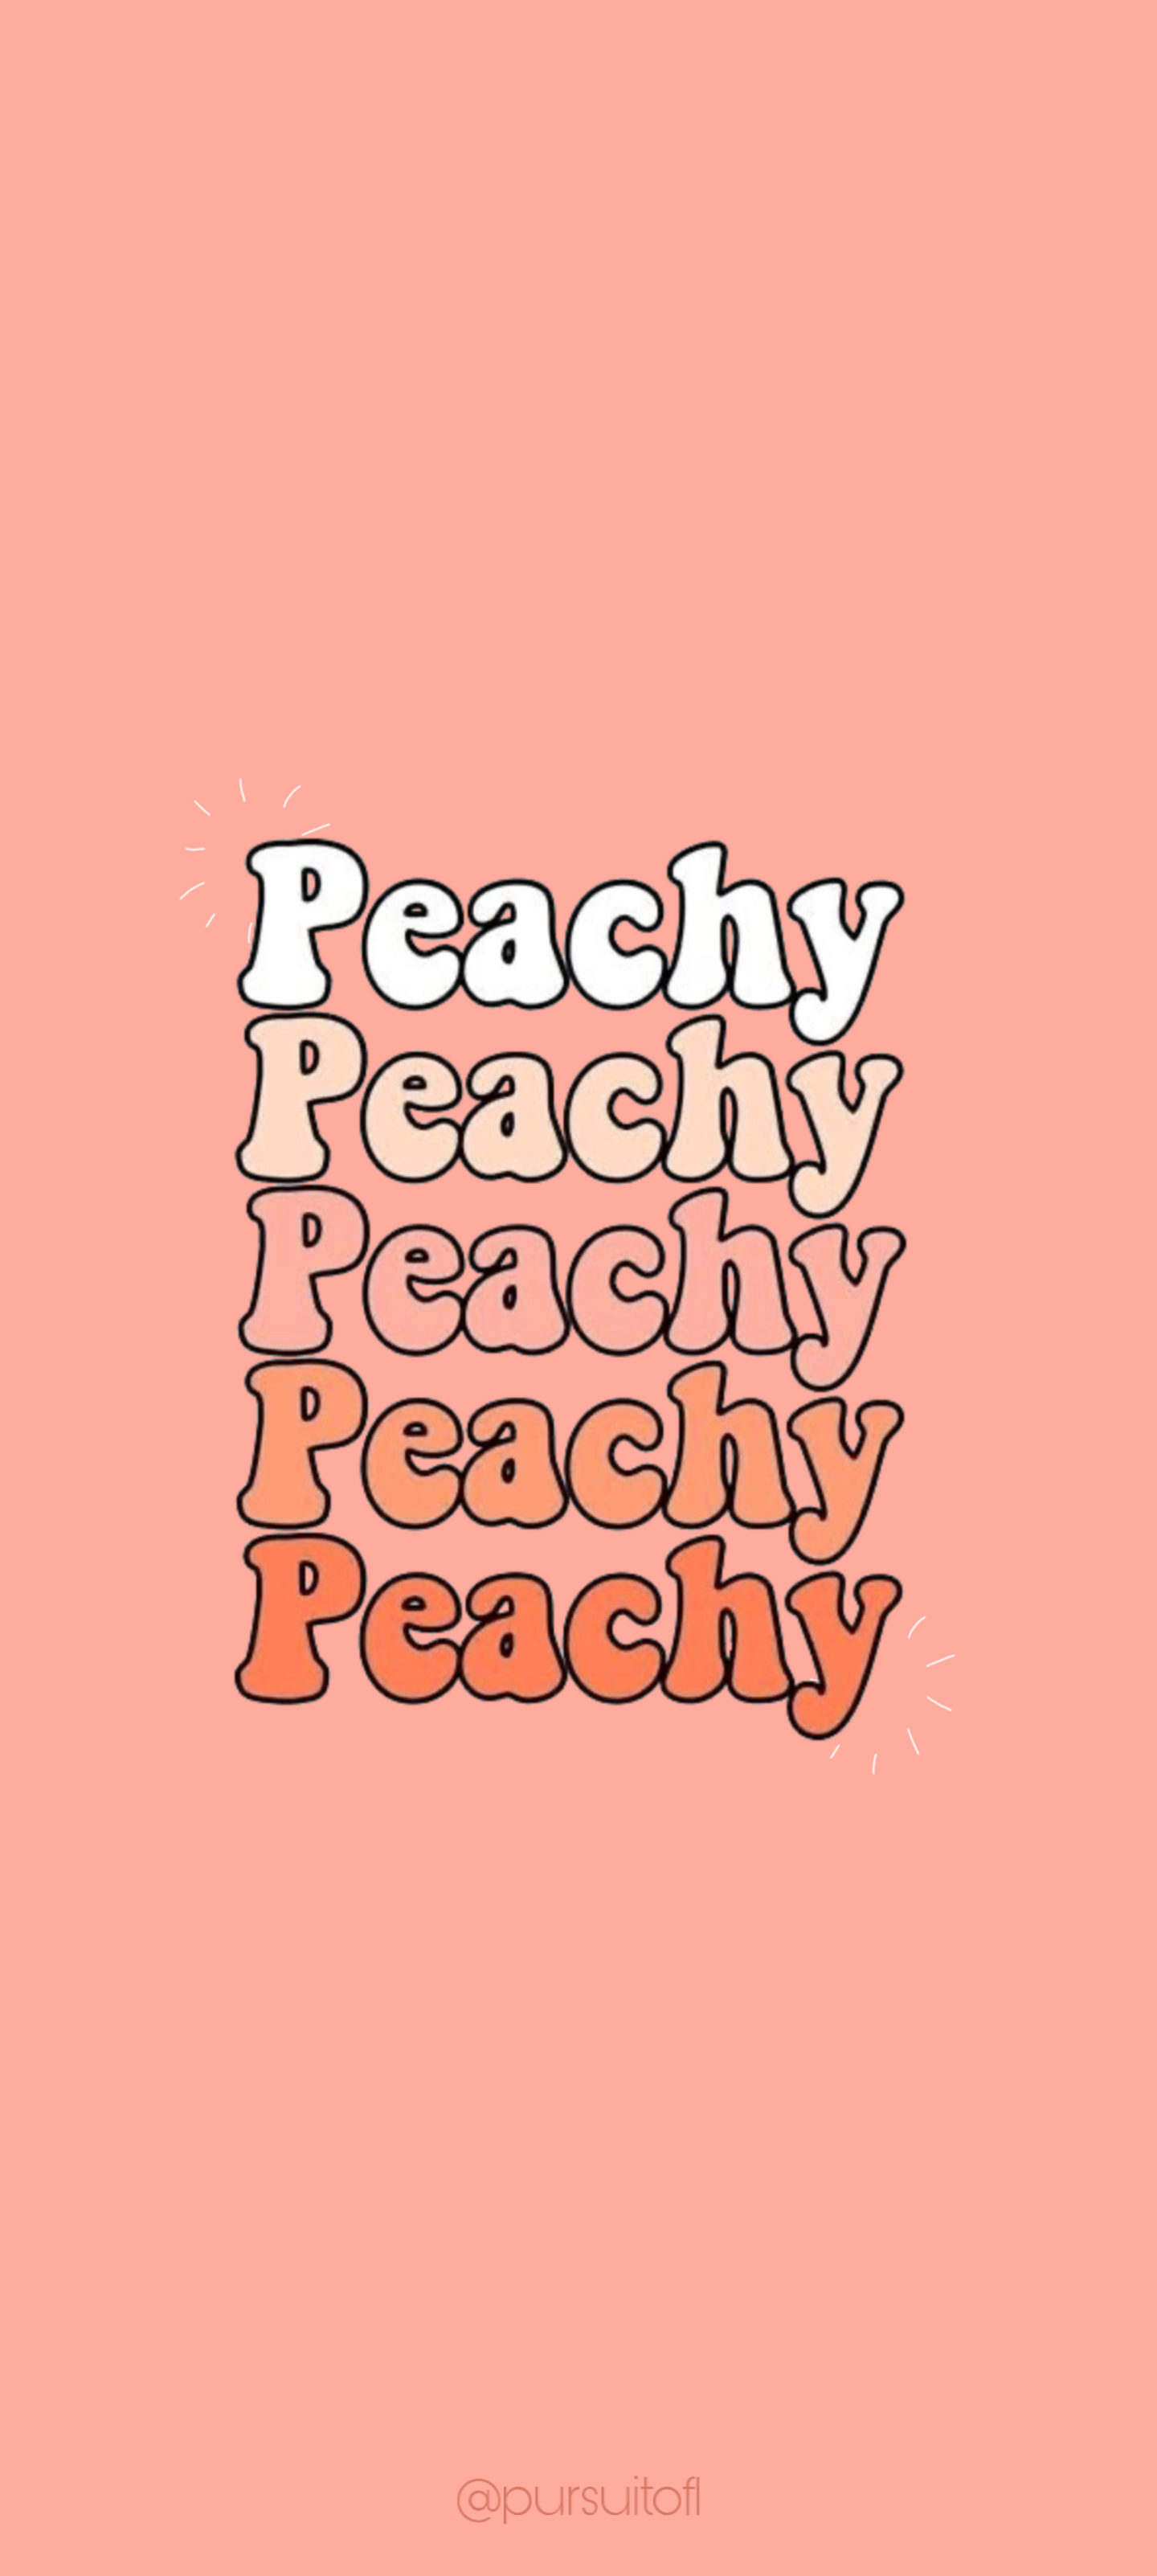 Peach color phone wallpaper with peachy text in multiple shades